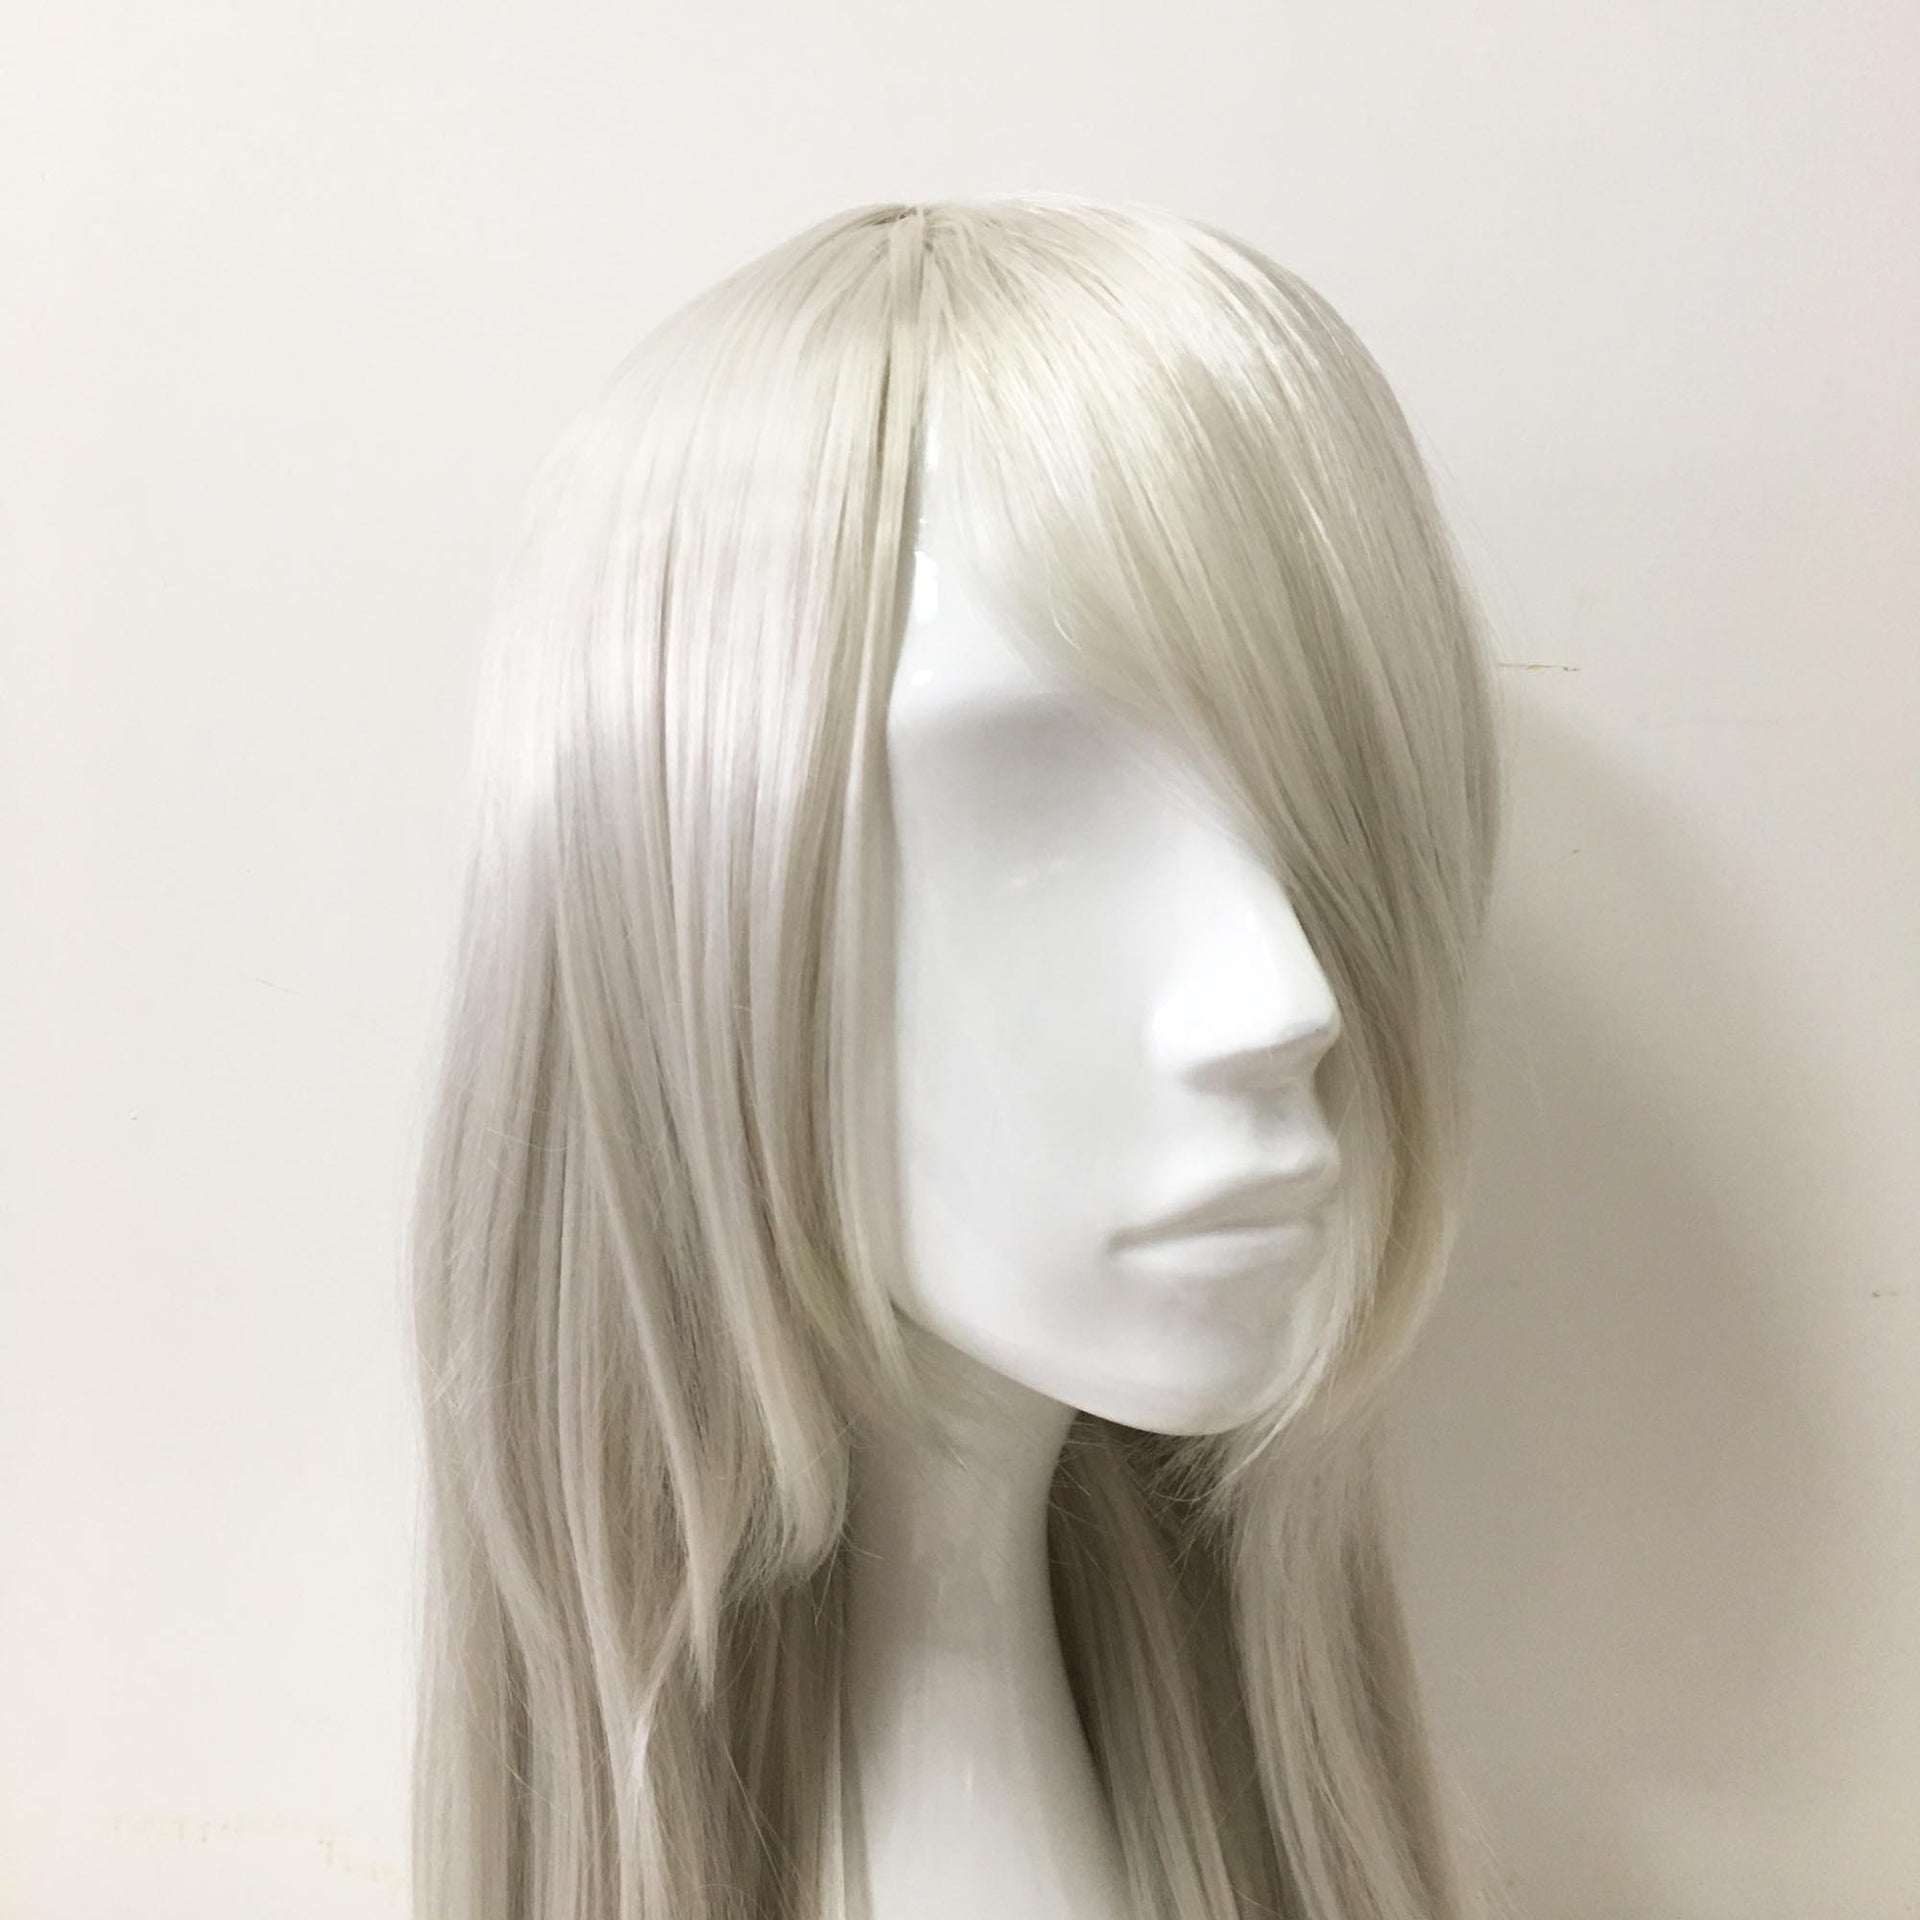 nevermindyrhead Women Silver White Long Straight Long Side Swept Bangs Cosplay Wig